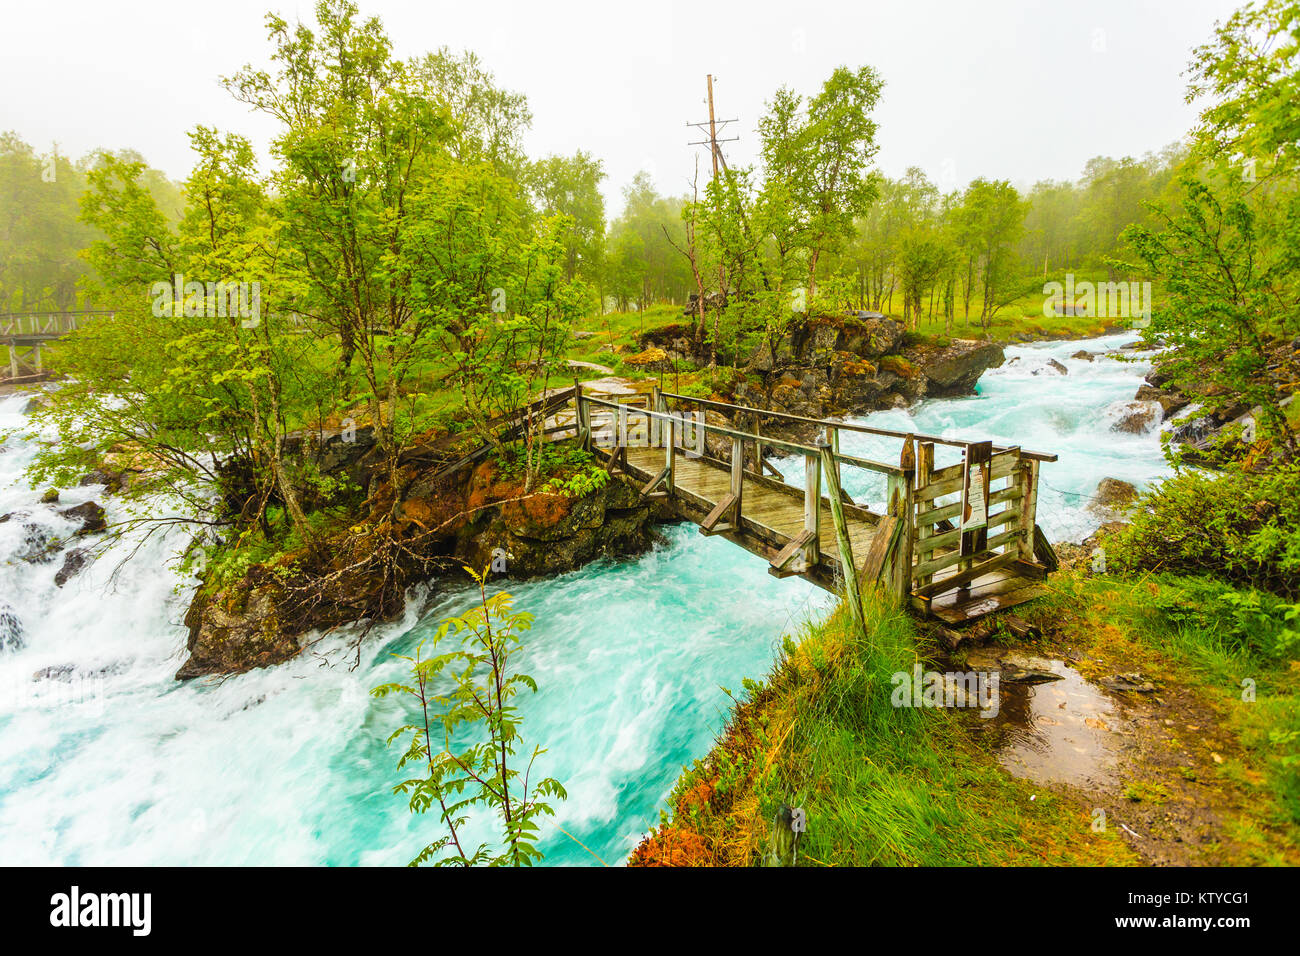 Travel, beauty in nature. Small bridge and waterfall torrential river along the Aurlandsfjellet mountains in Norway Sogn og Fjordane, foggy hazy summe Stock Photo